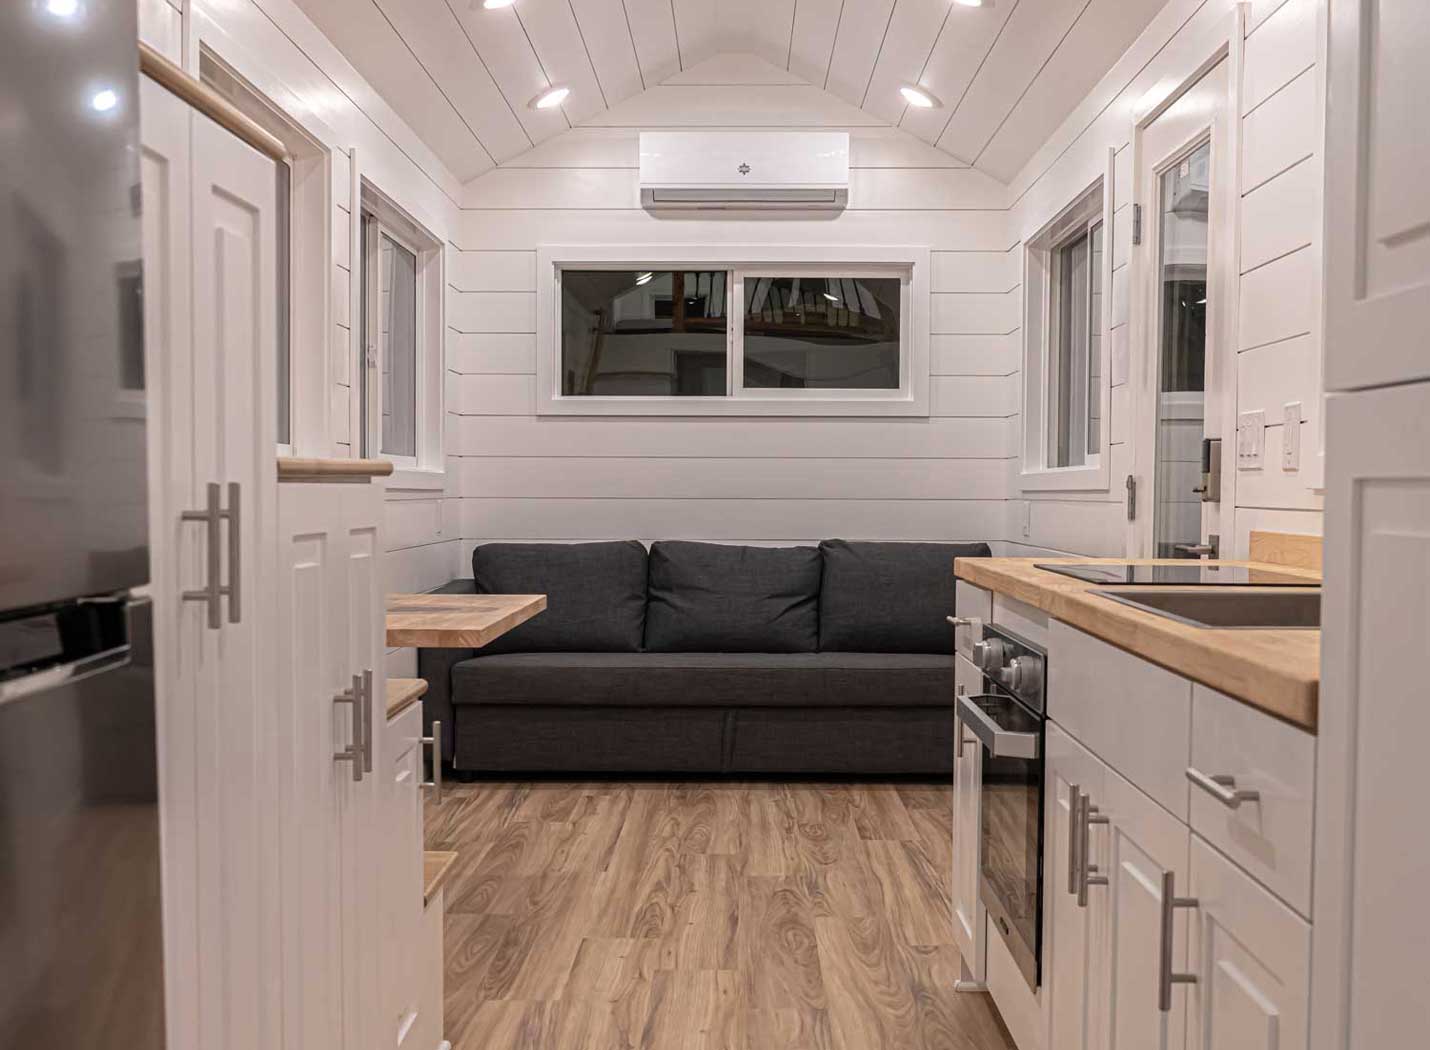 Heritage tiny house model interior showing kitchen and sofa